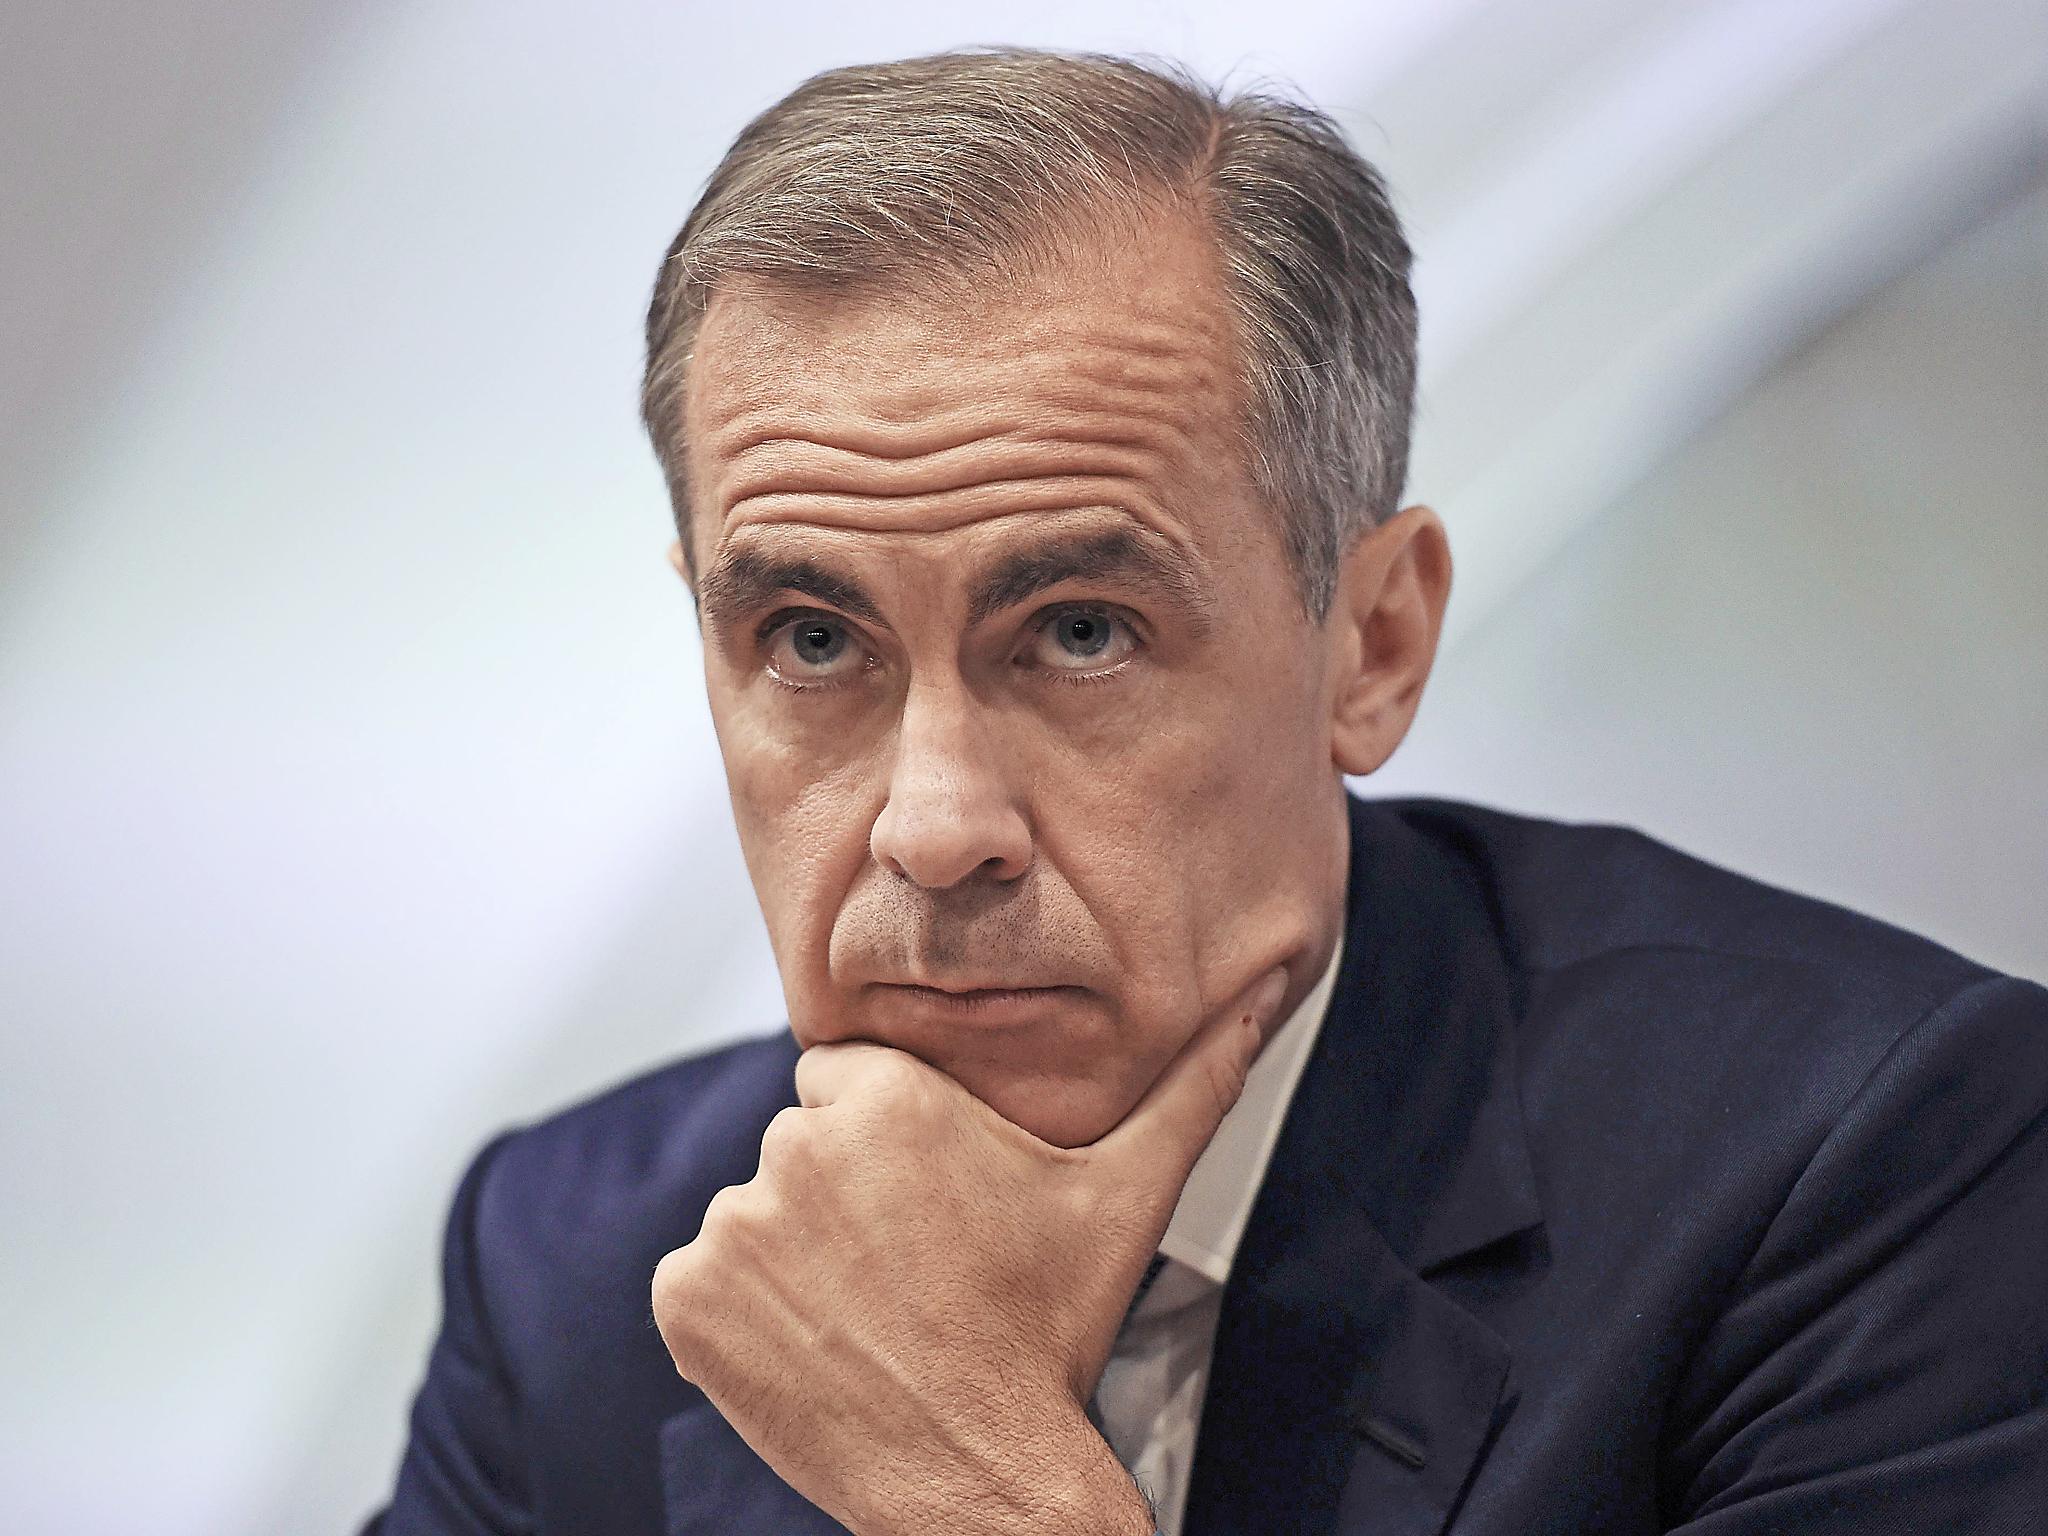 Mark Carney has said the Bank will 'tolerate' an inflation overshoot